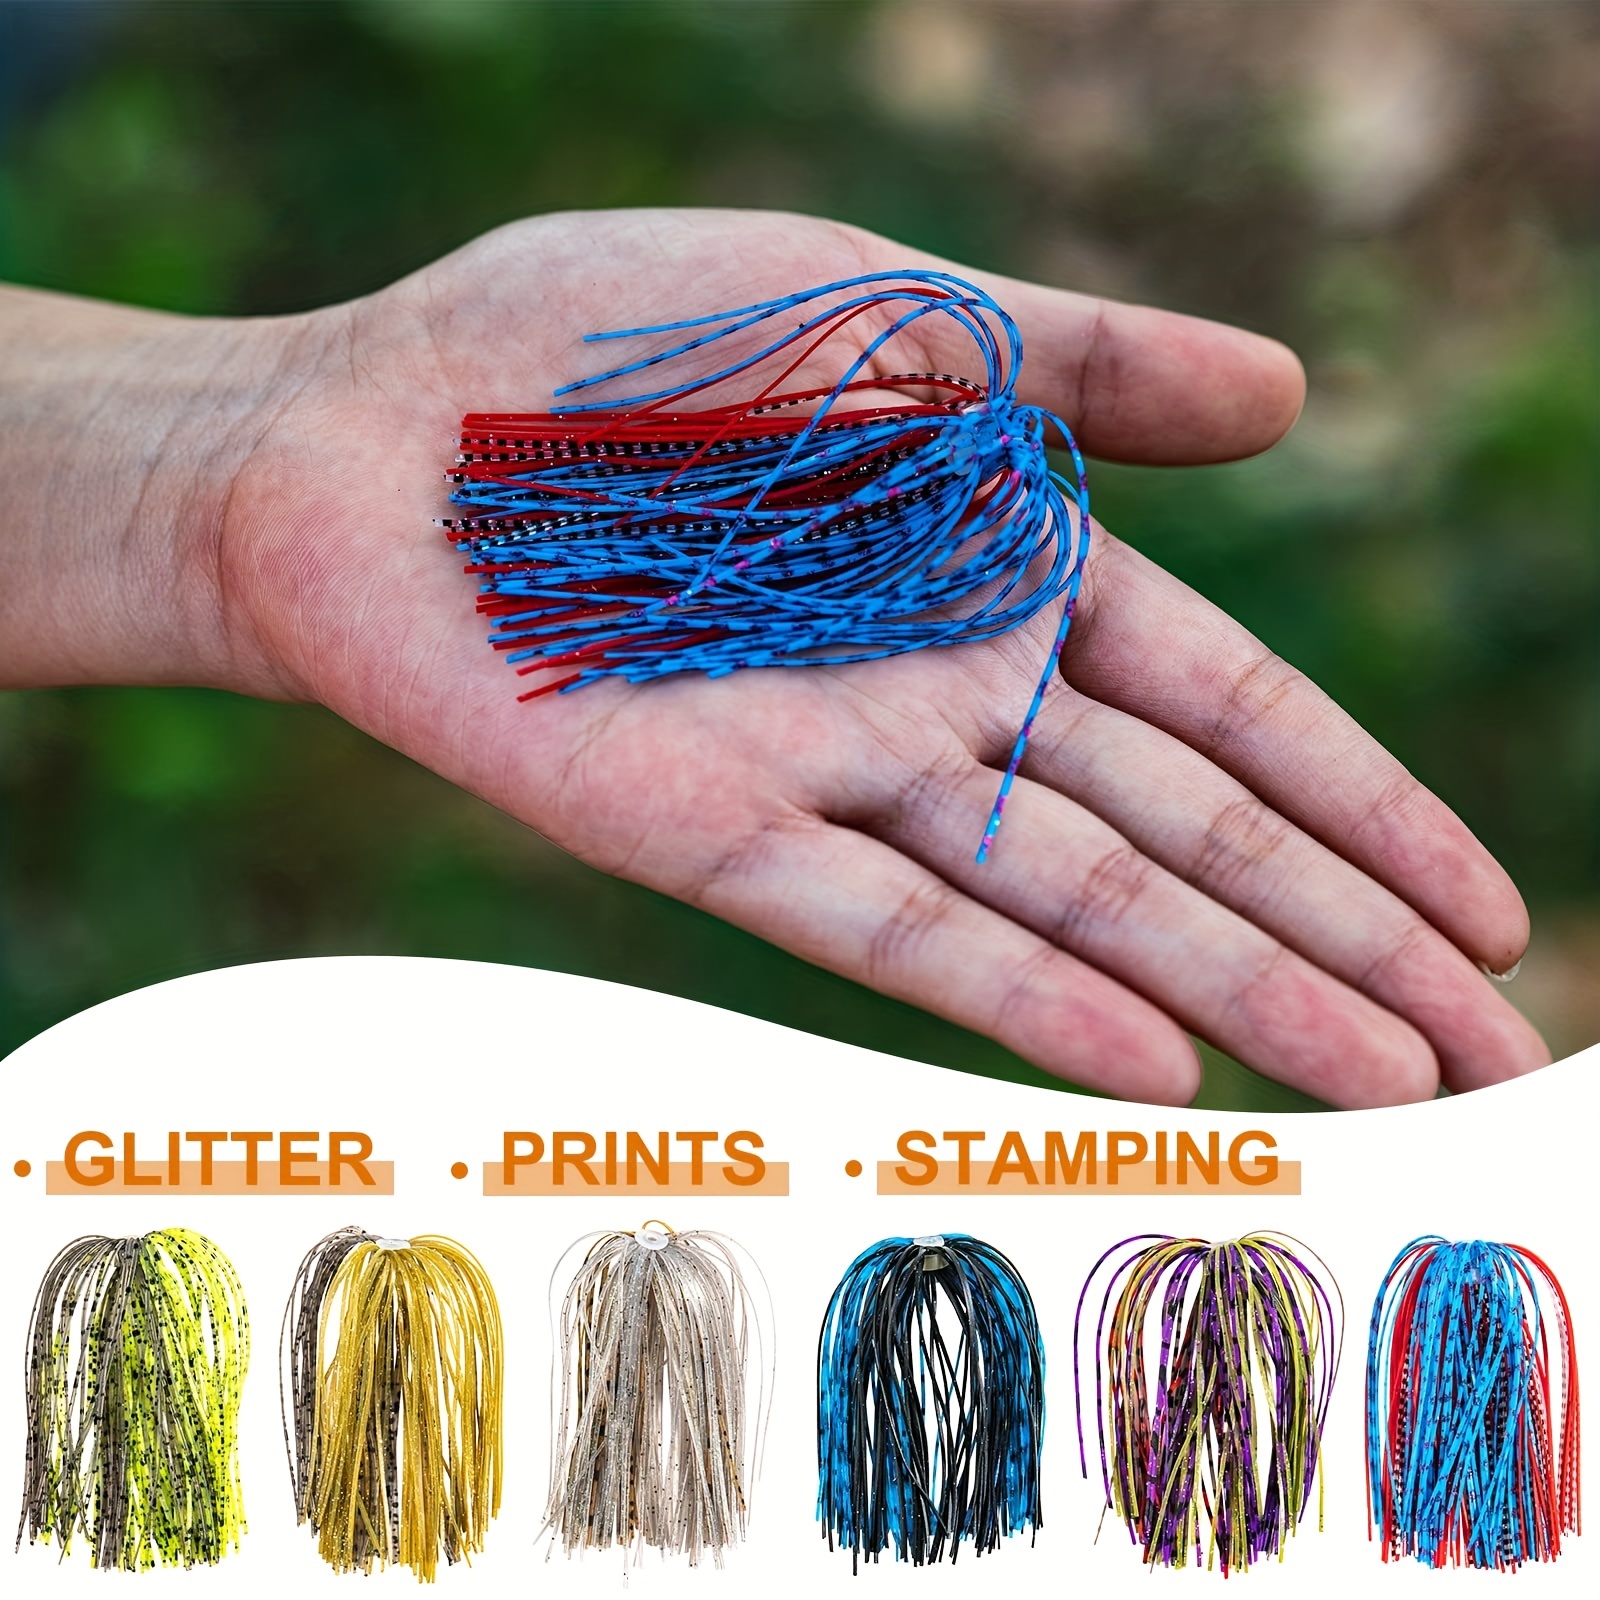  HAKKALA Fish Shaped Jig Head Swim Jigs and Trailers Set,  Silicone Skirts Weed Guard Jigs and Soft Lure Kits for Bass Fishing  (10g(3/8oz) - Clear/Muddy Water) : Sports & Outdoors